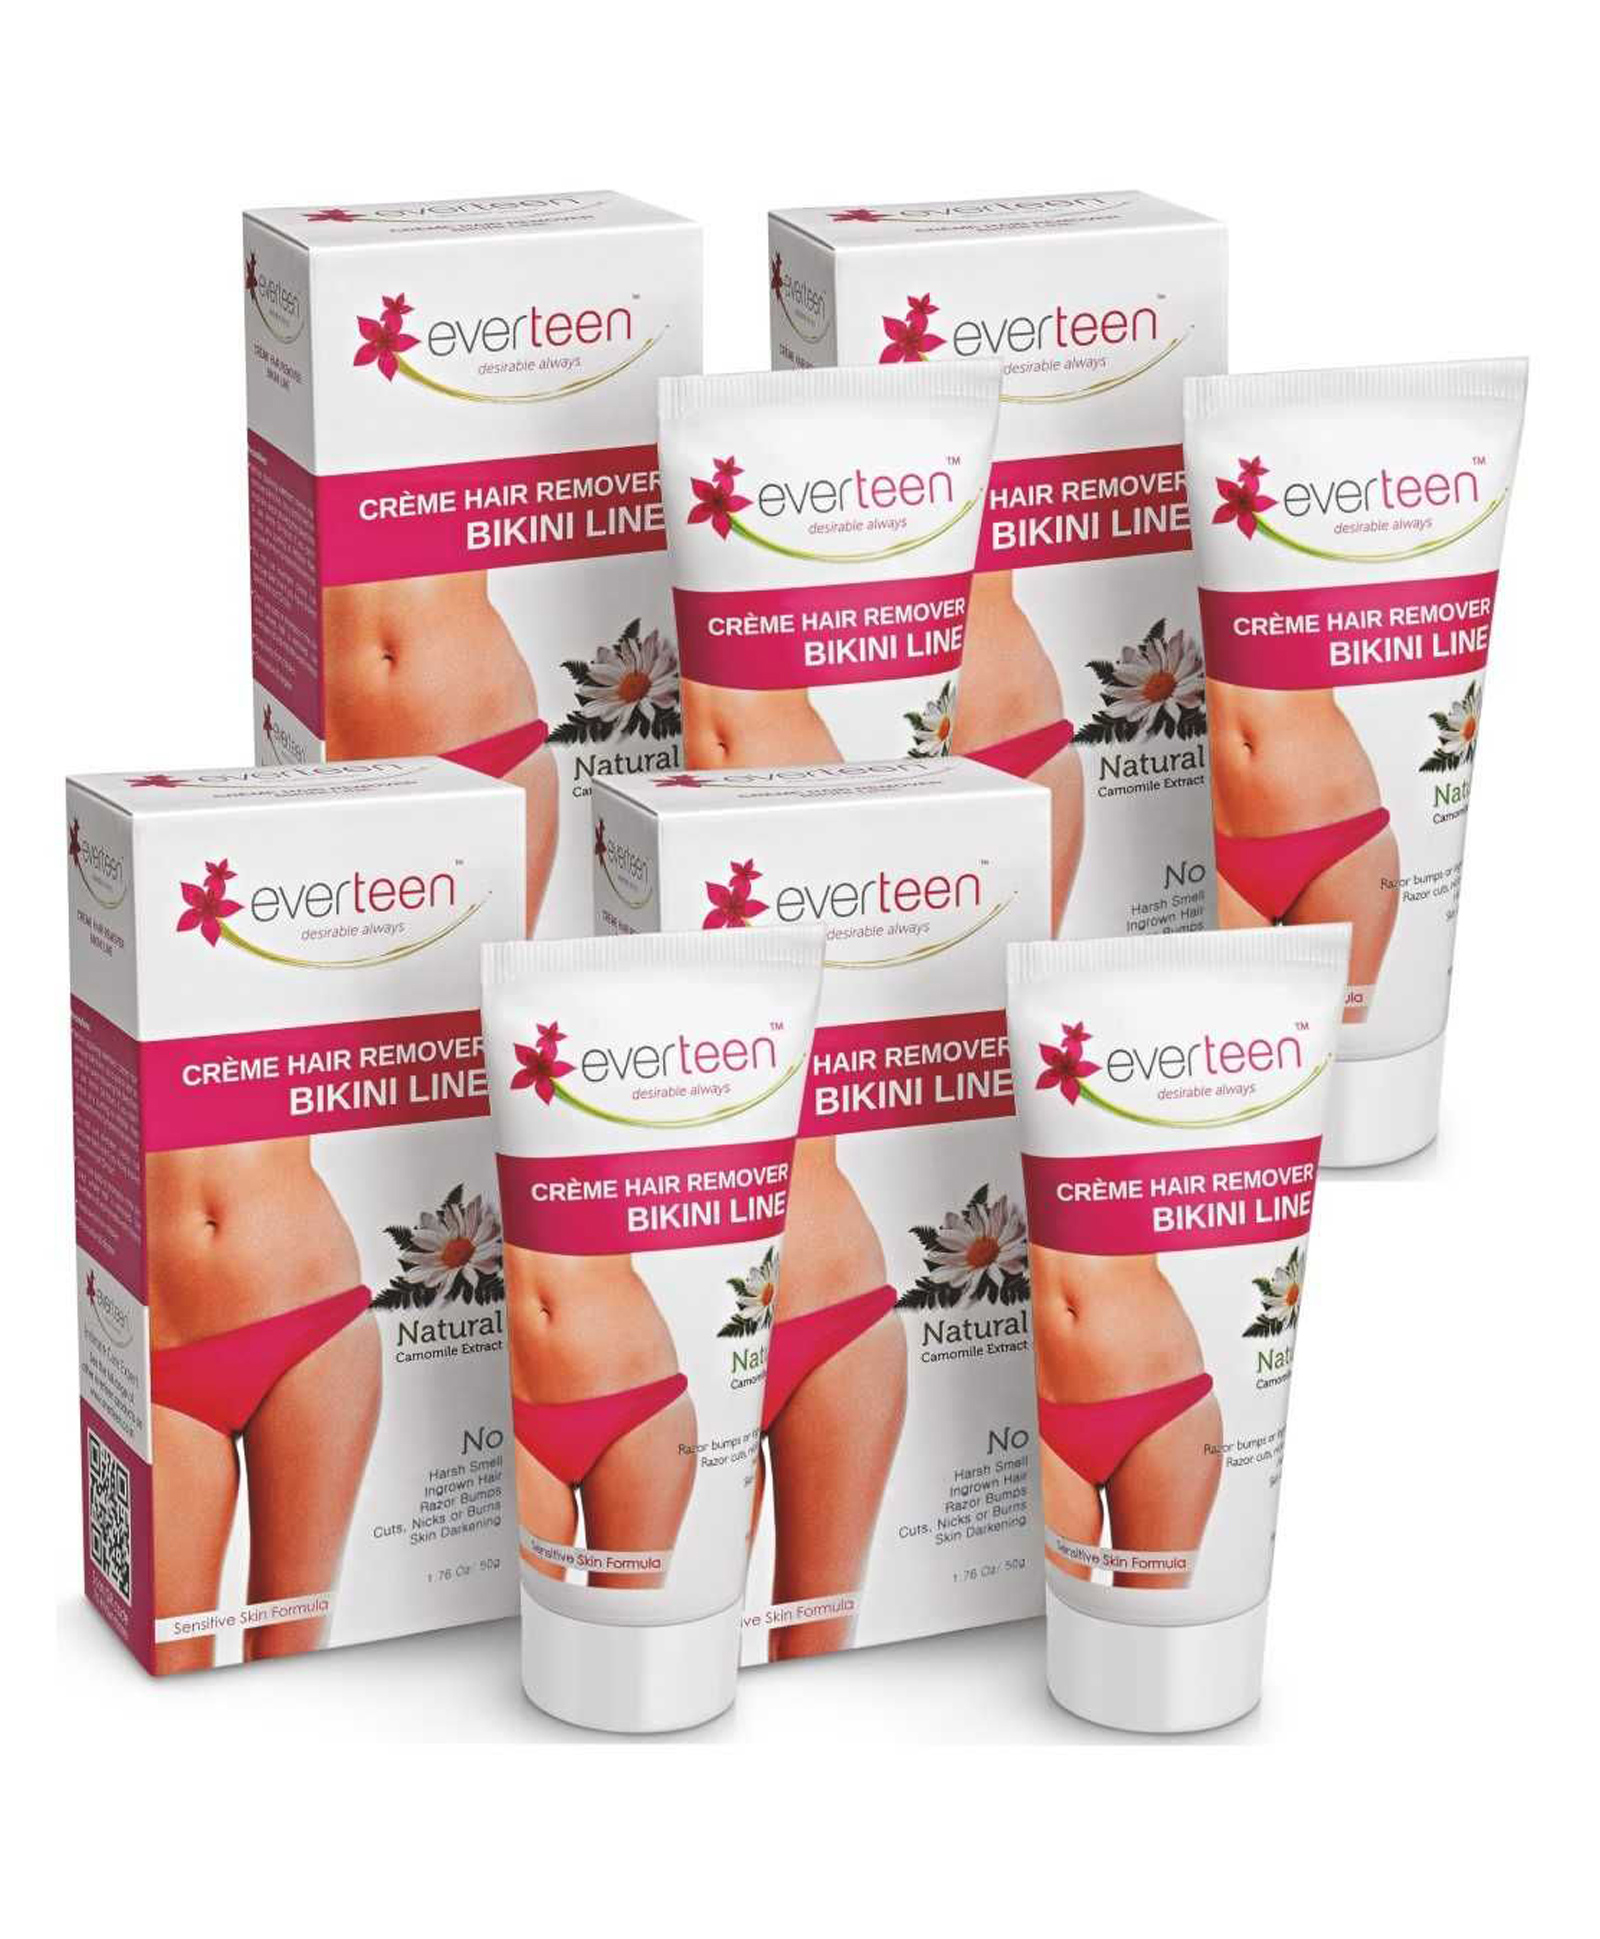 everteen Bikini Line Hair Remover Creme Natural for Women 4 Packs 50g Each  Online in India, Buy at Best Price from  - 11479646